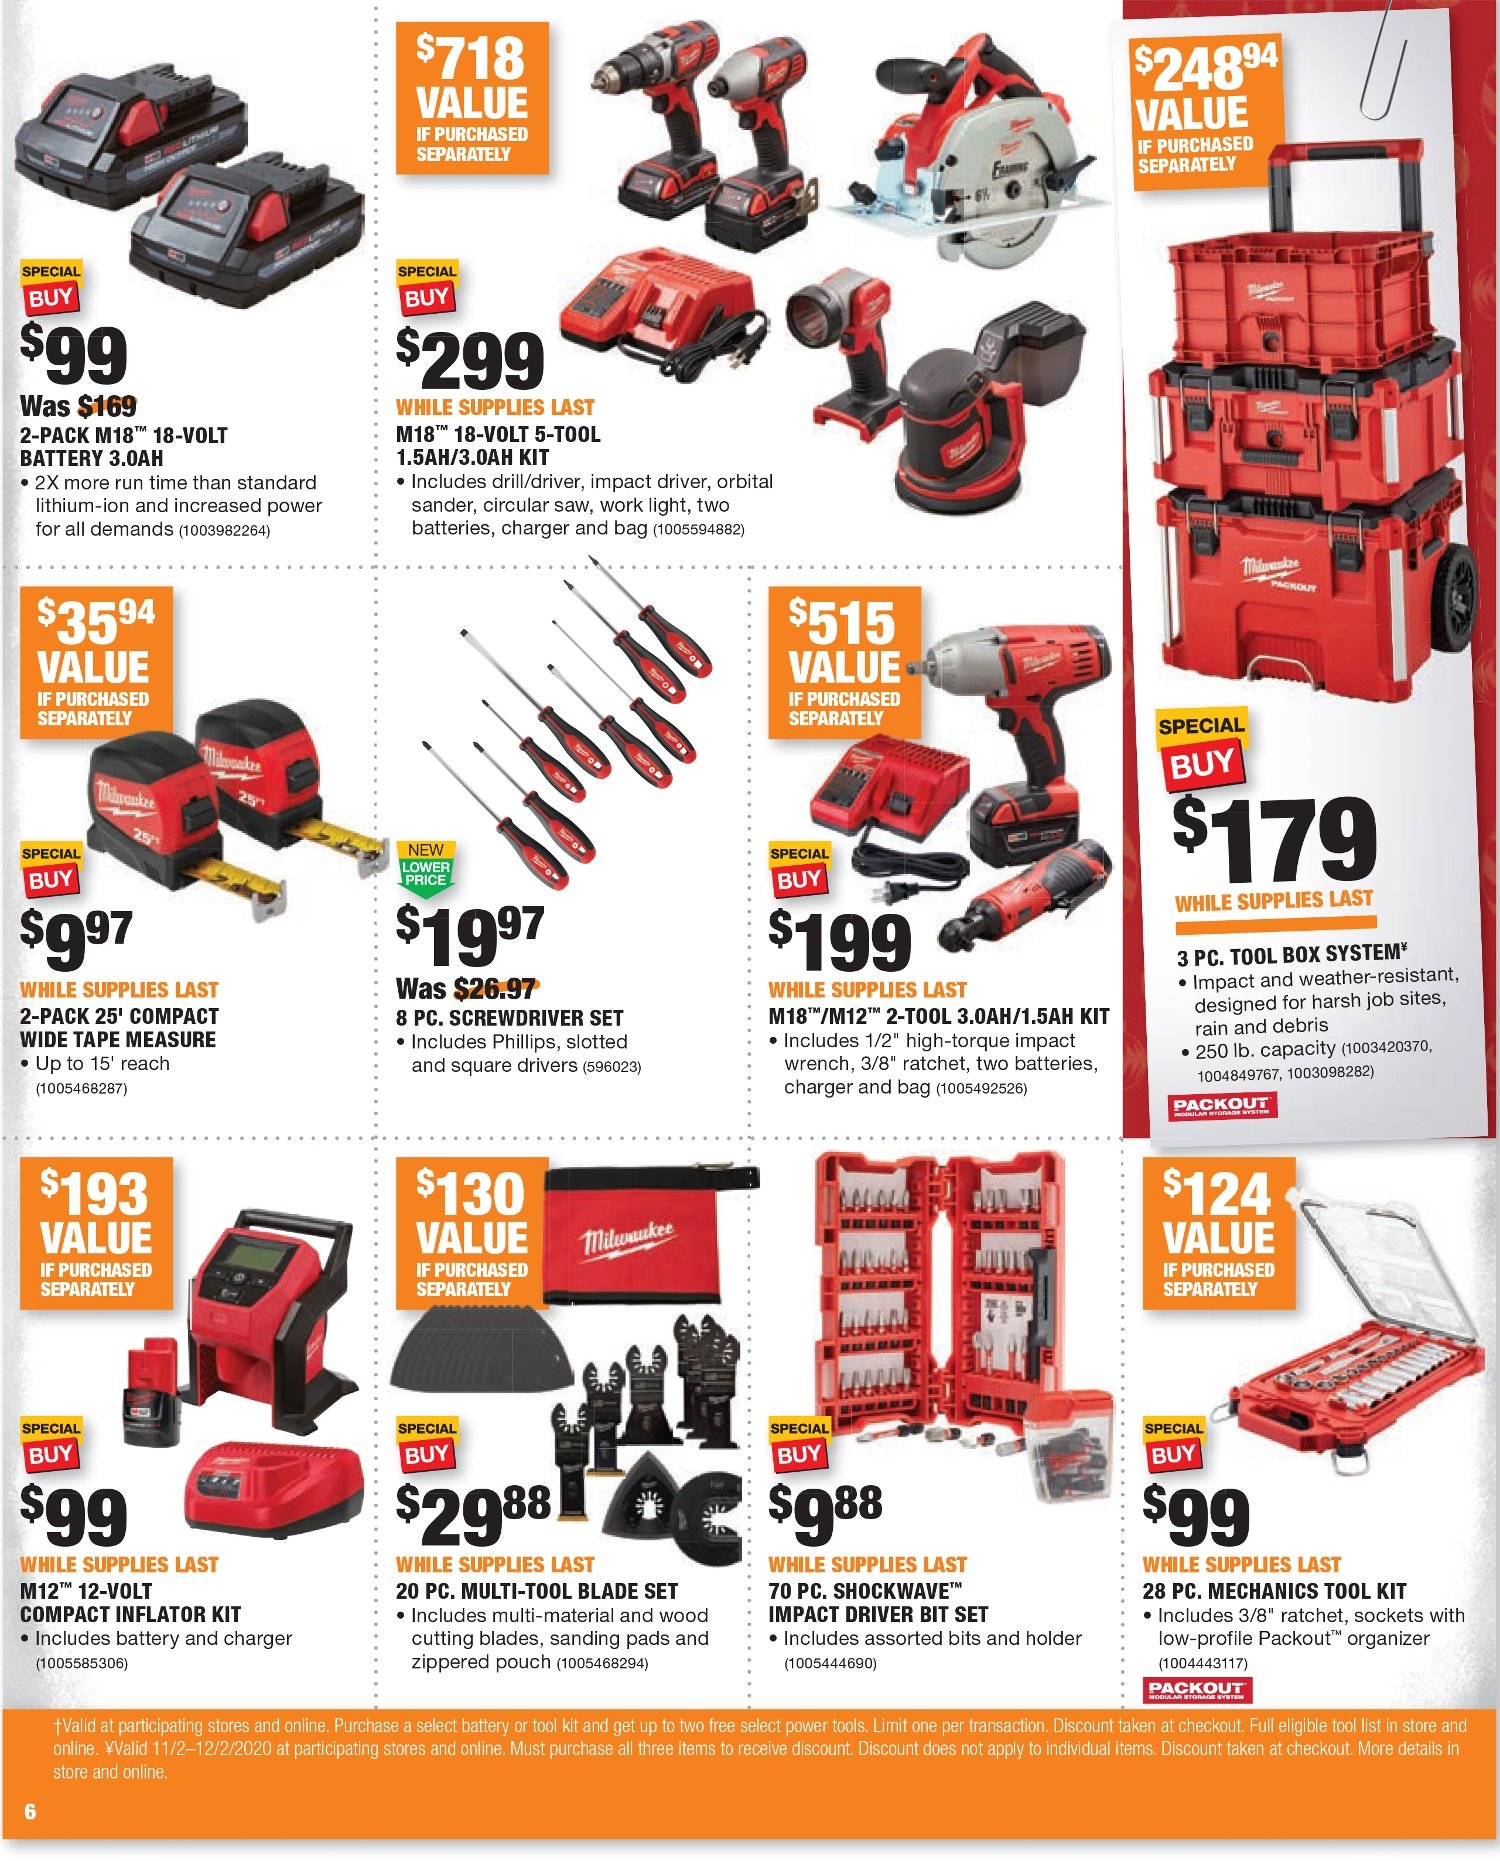 Home Depot 2020 Black Friday Ad Scan, Coupons and Offers